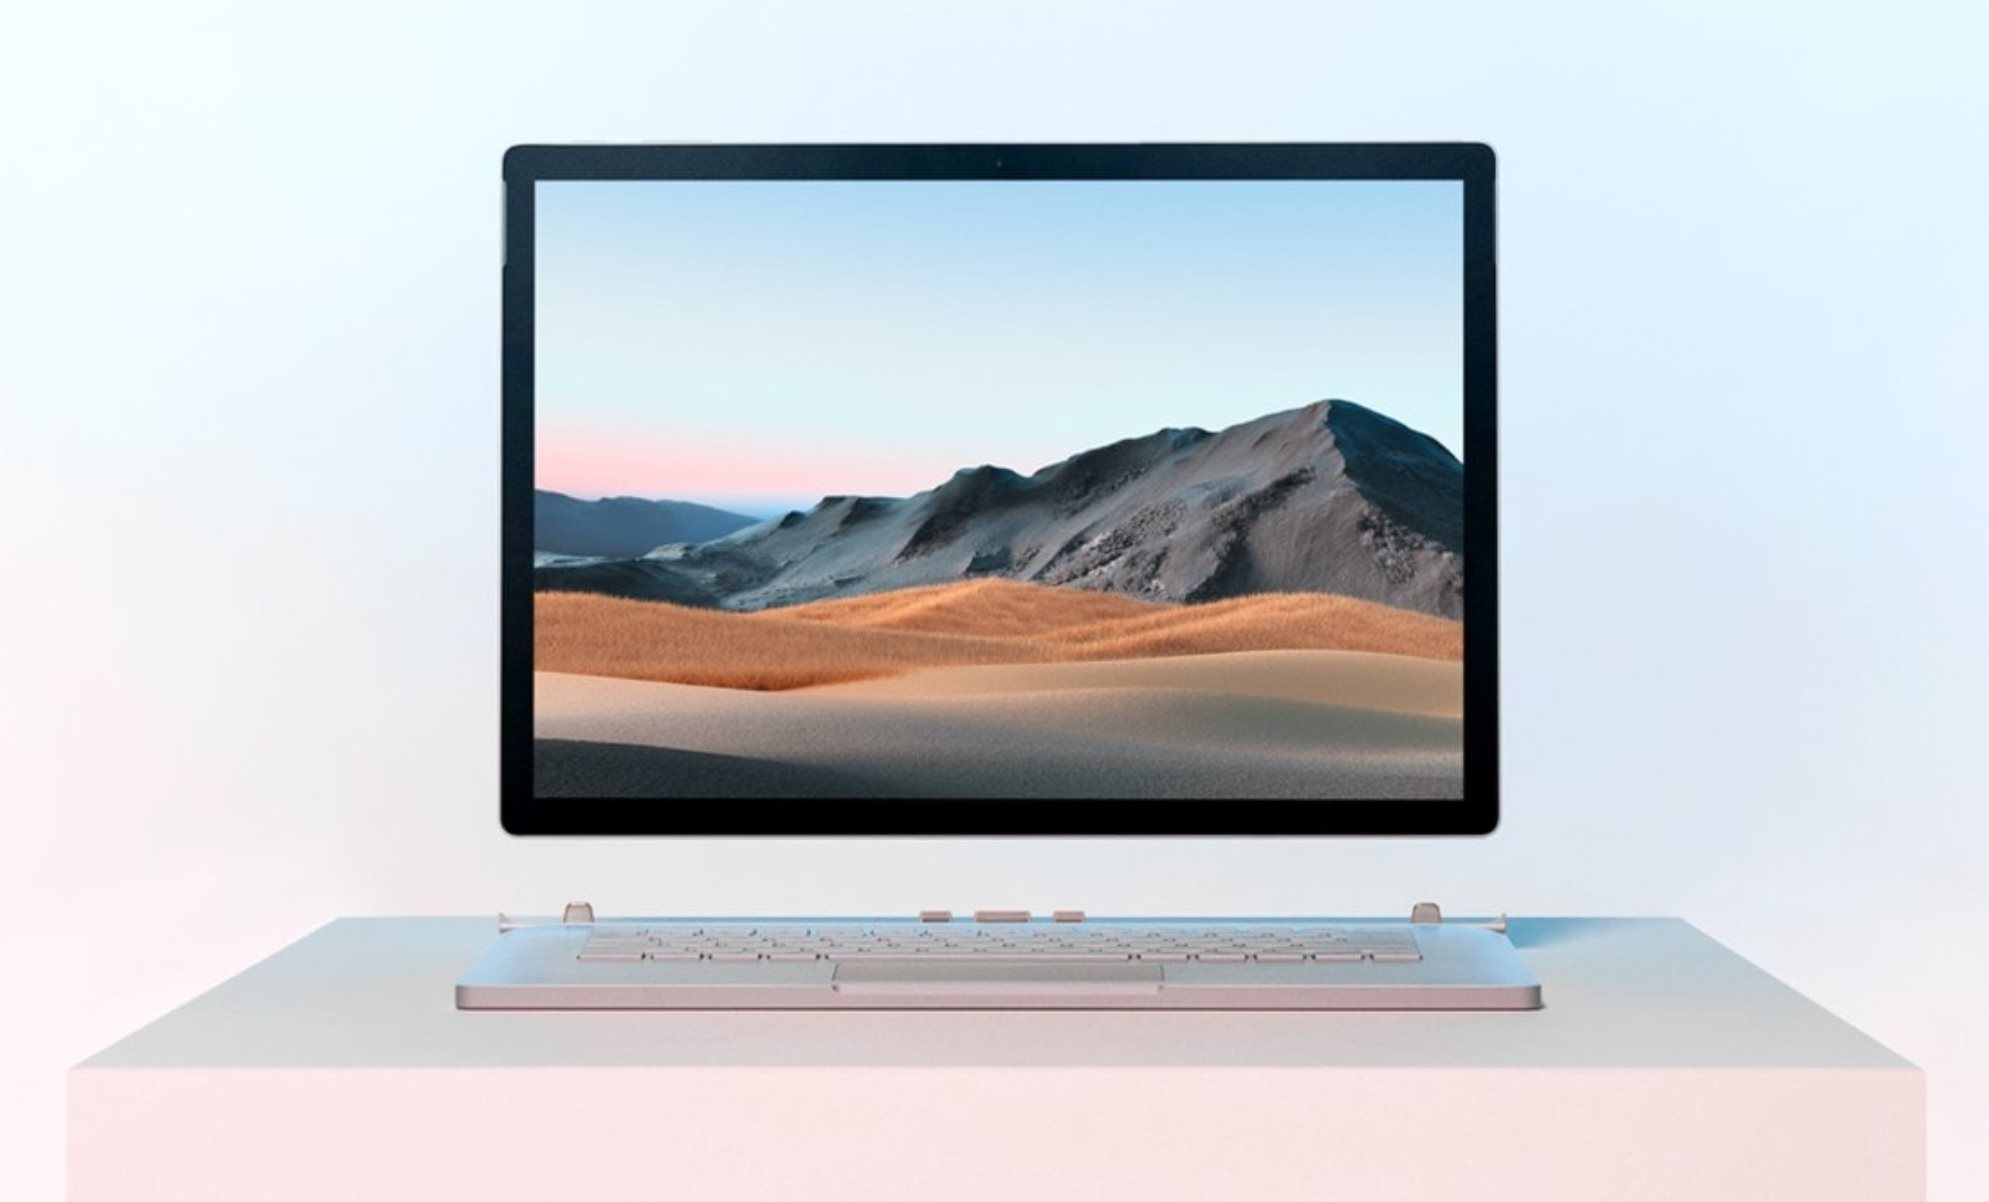 What's New in the September 2020 Microsoft Surface Book 3 Firmware Update